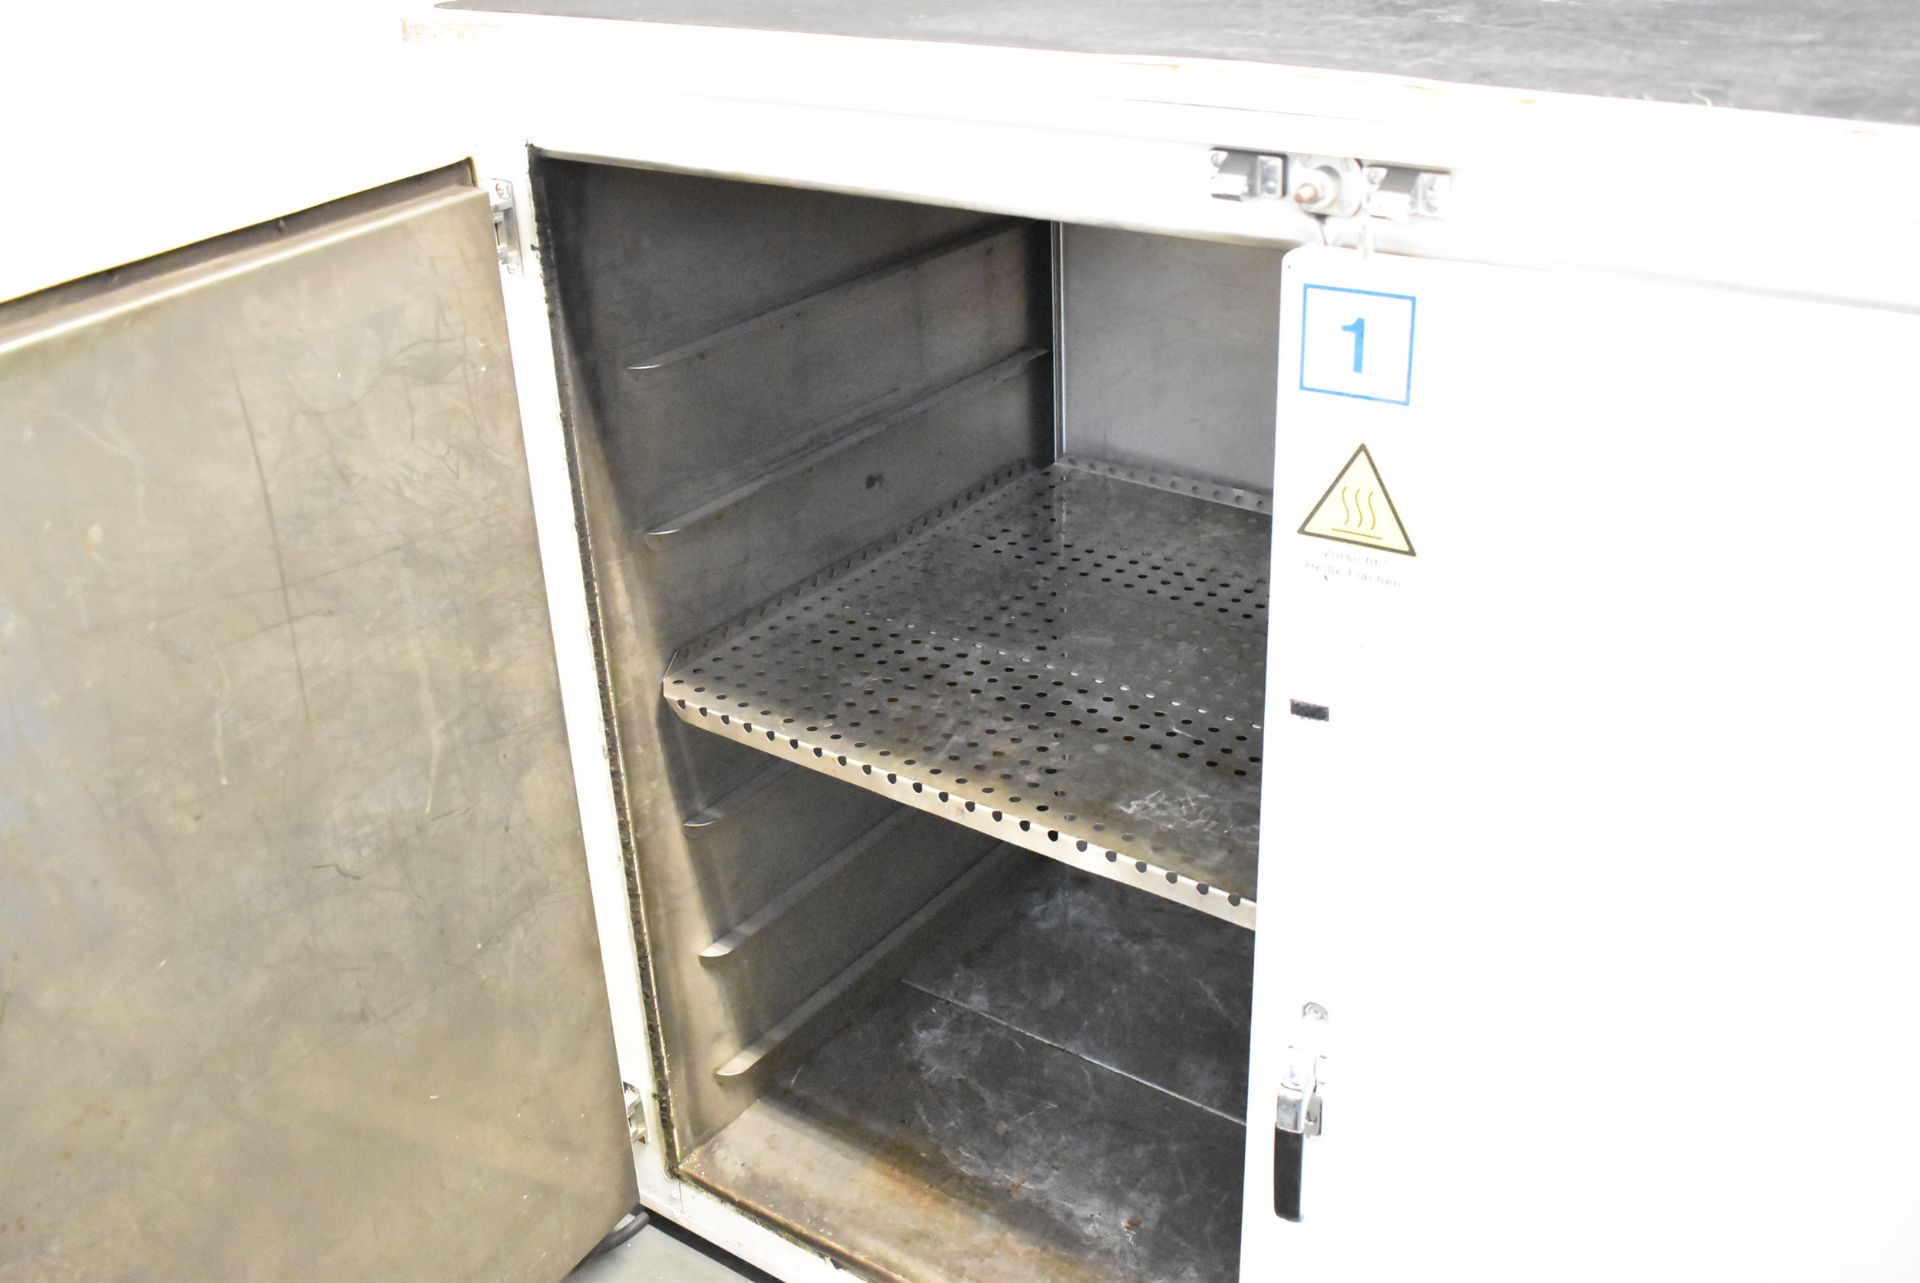 HORO 600V/SO ELECTRIC LAB OVEN WITH 150 DEG. C MAX. TEMP., S/N N/A (BAU 23) [Removal Fee = € 55 + - Image 2 of 3